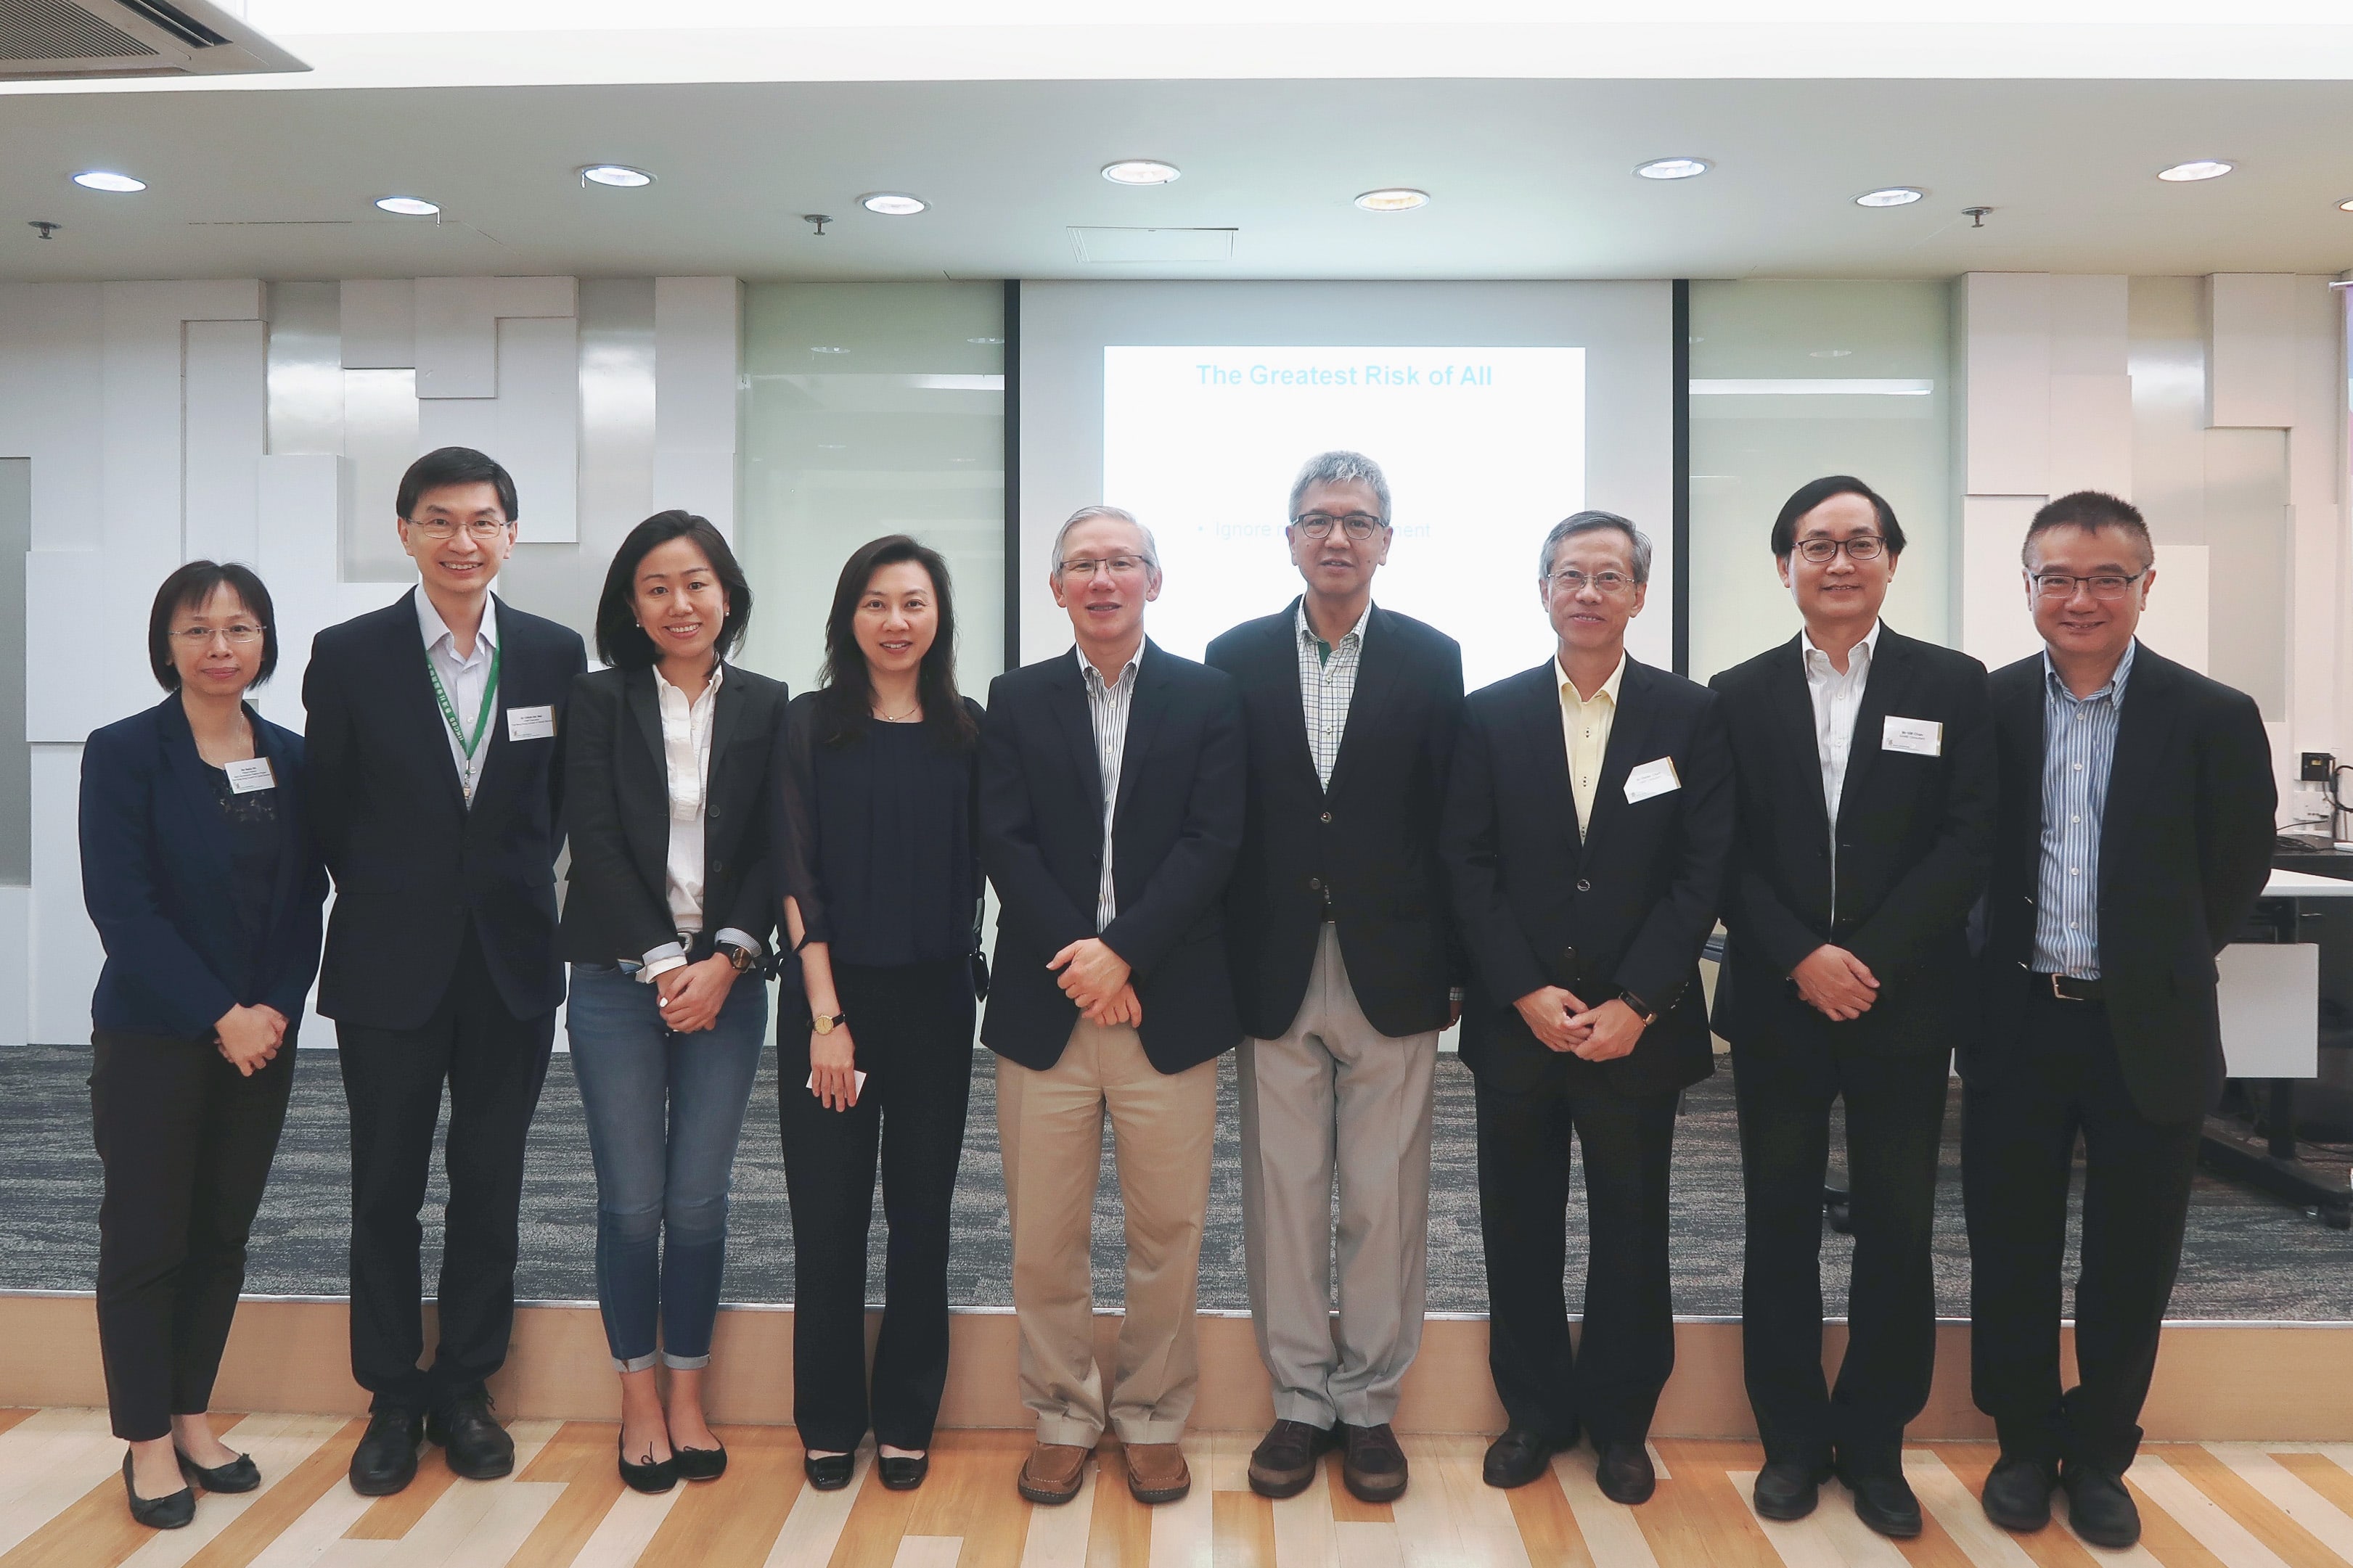 (From left) Ms Stella Ho, Project Director of HKCSS, Mr Chua Hoi Wai, Chief Executive of HKCSS, Dr Norah Wang, Ms Venus Cheng, Dr CK Lo, Mr Benjamin Tang, Mr Walter Chan, Mr K M Chan, Consultants of GAME and Mr Cliff Choi, Business Director of HKCSS